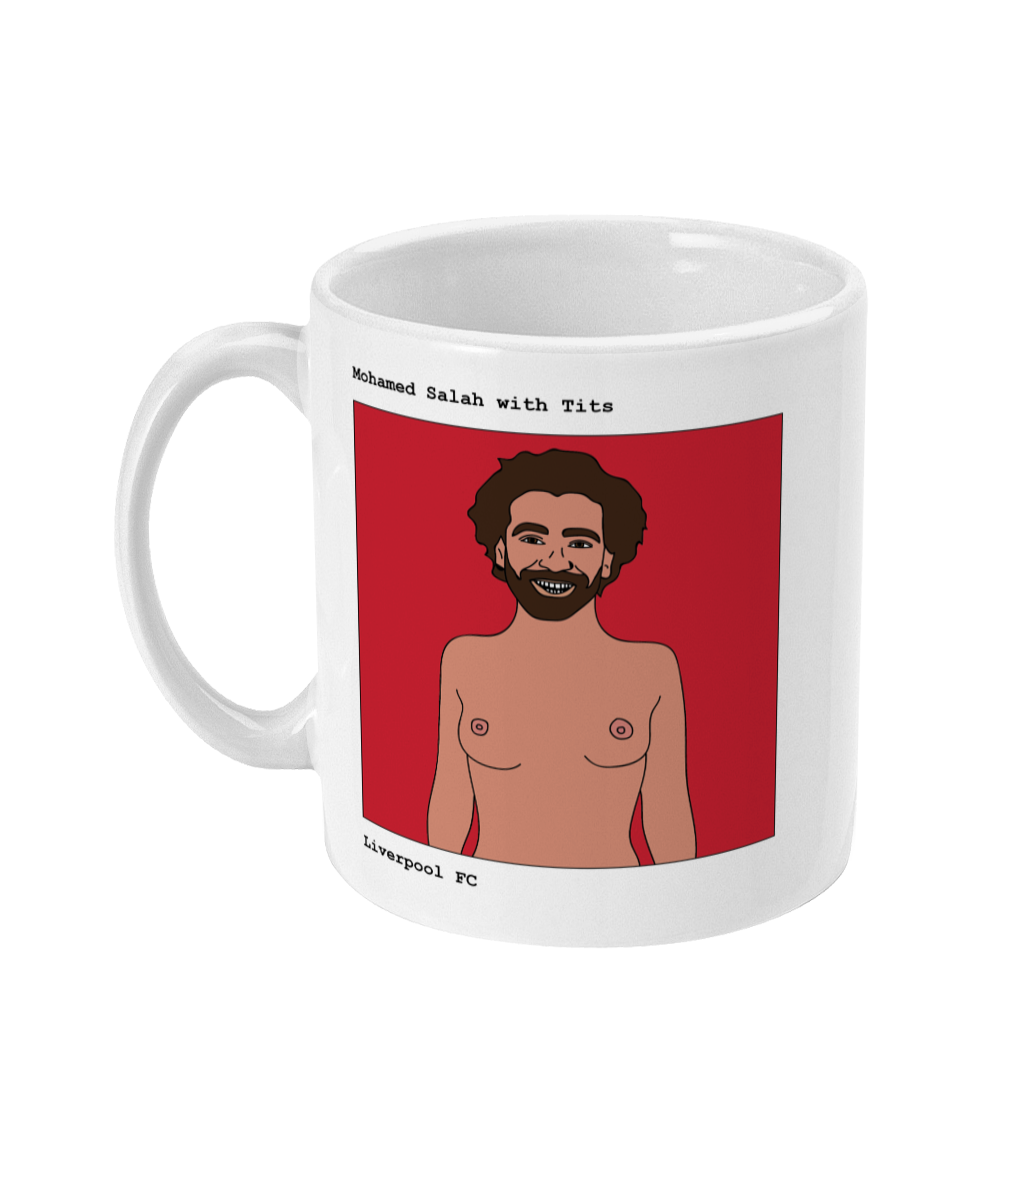 Mohamed Salah with Tits - Footballers with Tits